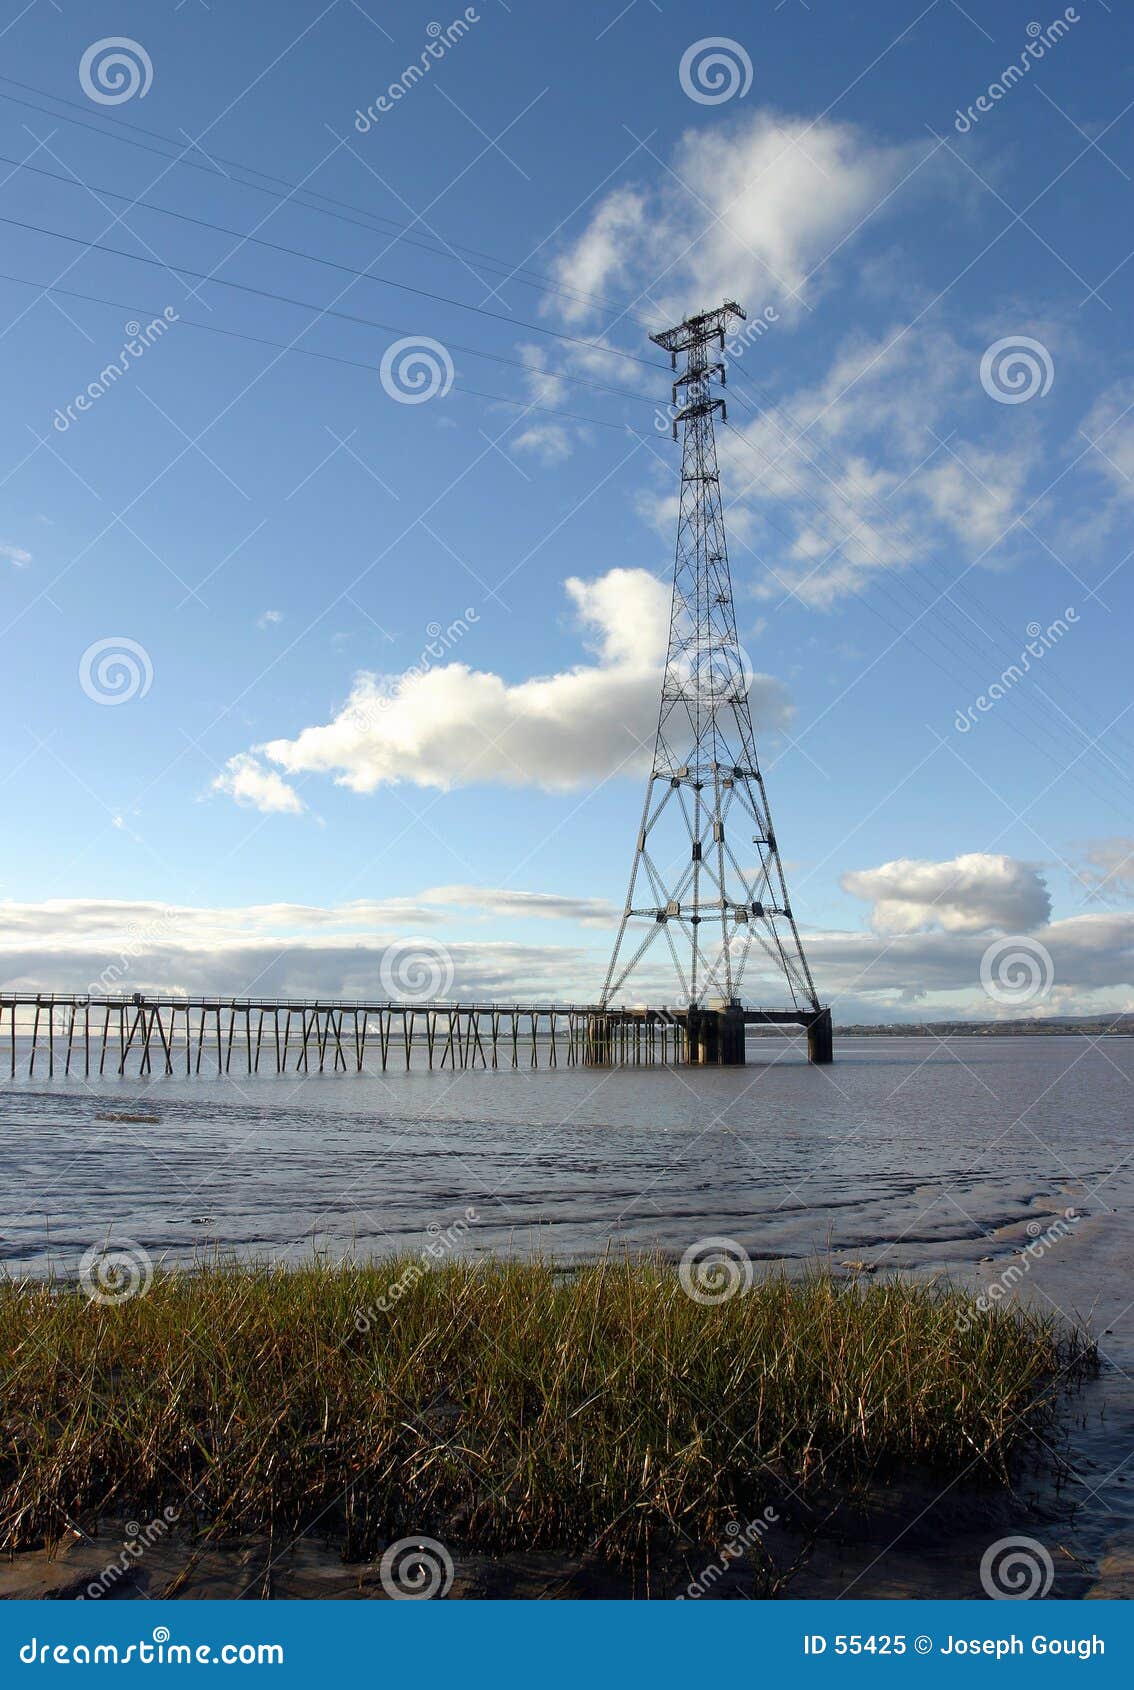 Pylon stock image. Image of industry, industrial, cable - 55425